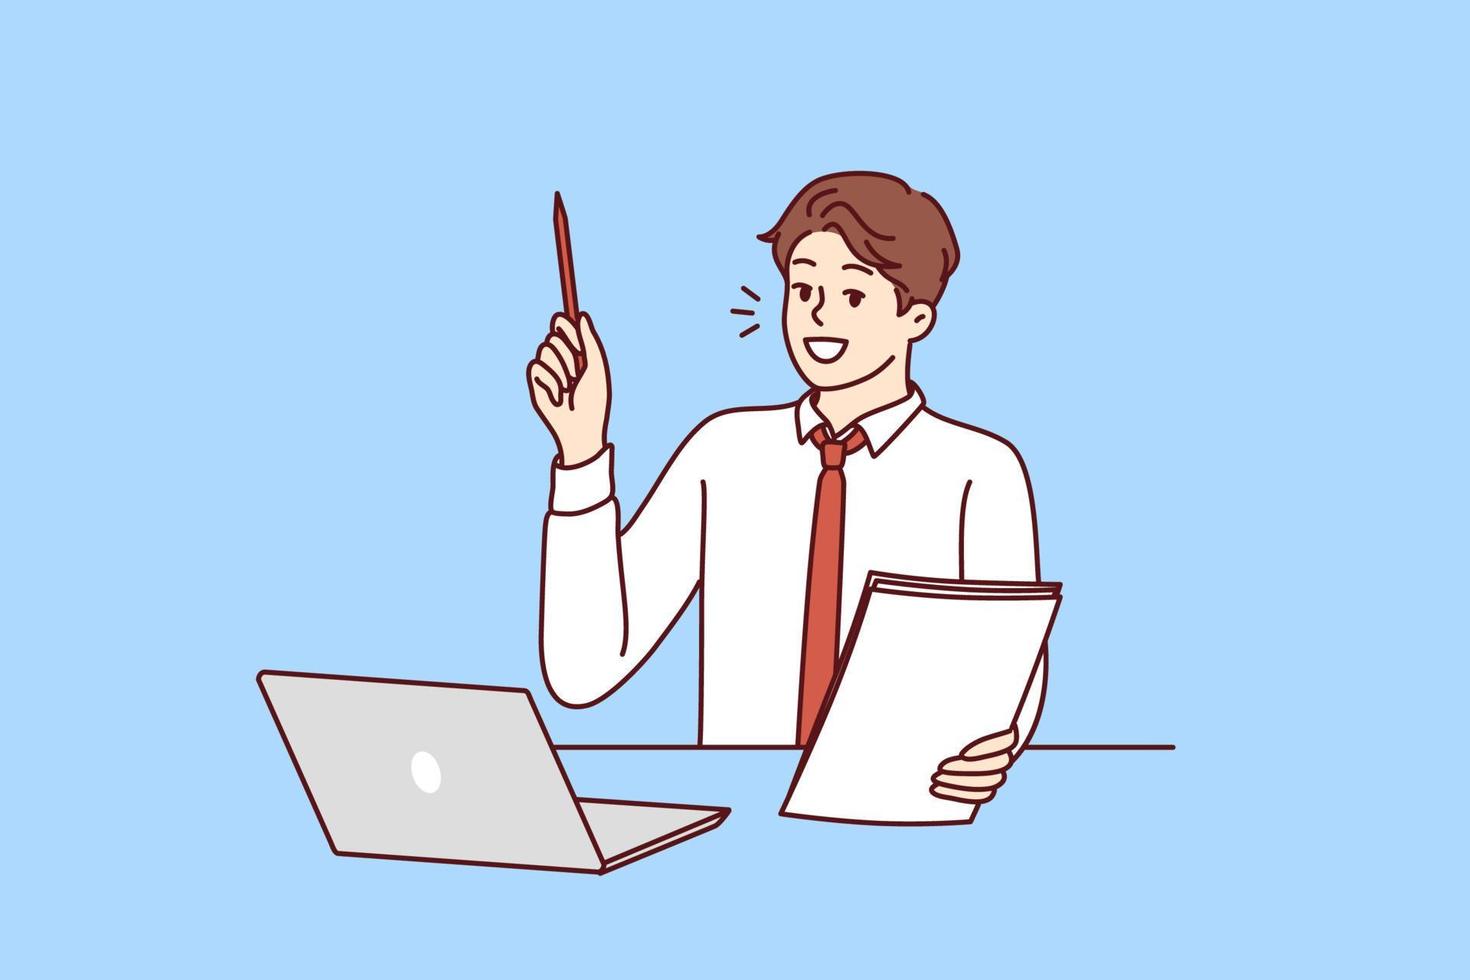 Businessman is sitting at table with laptop raising pen up participating in webinar on management. Guy student with notebook in hand raises hand wishing to become successful businessman vector